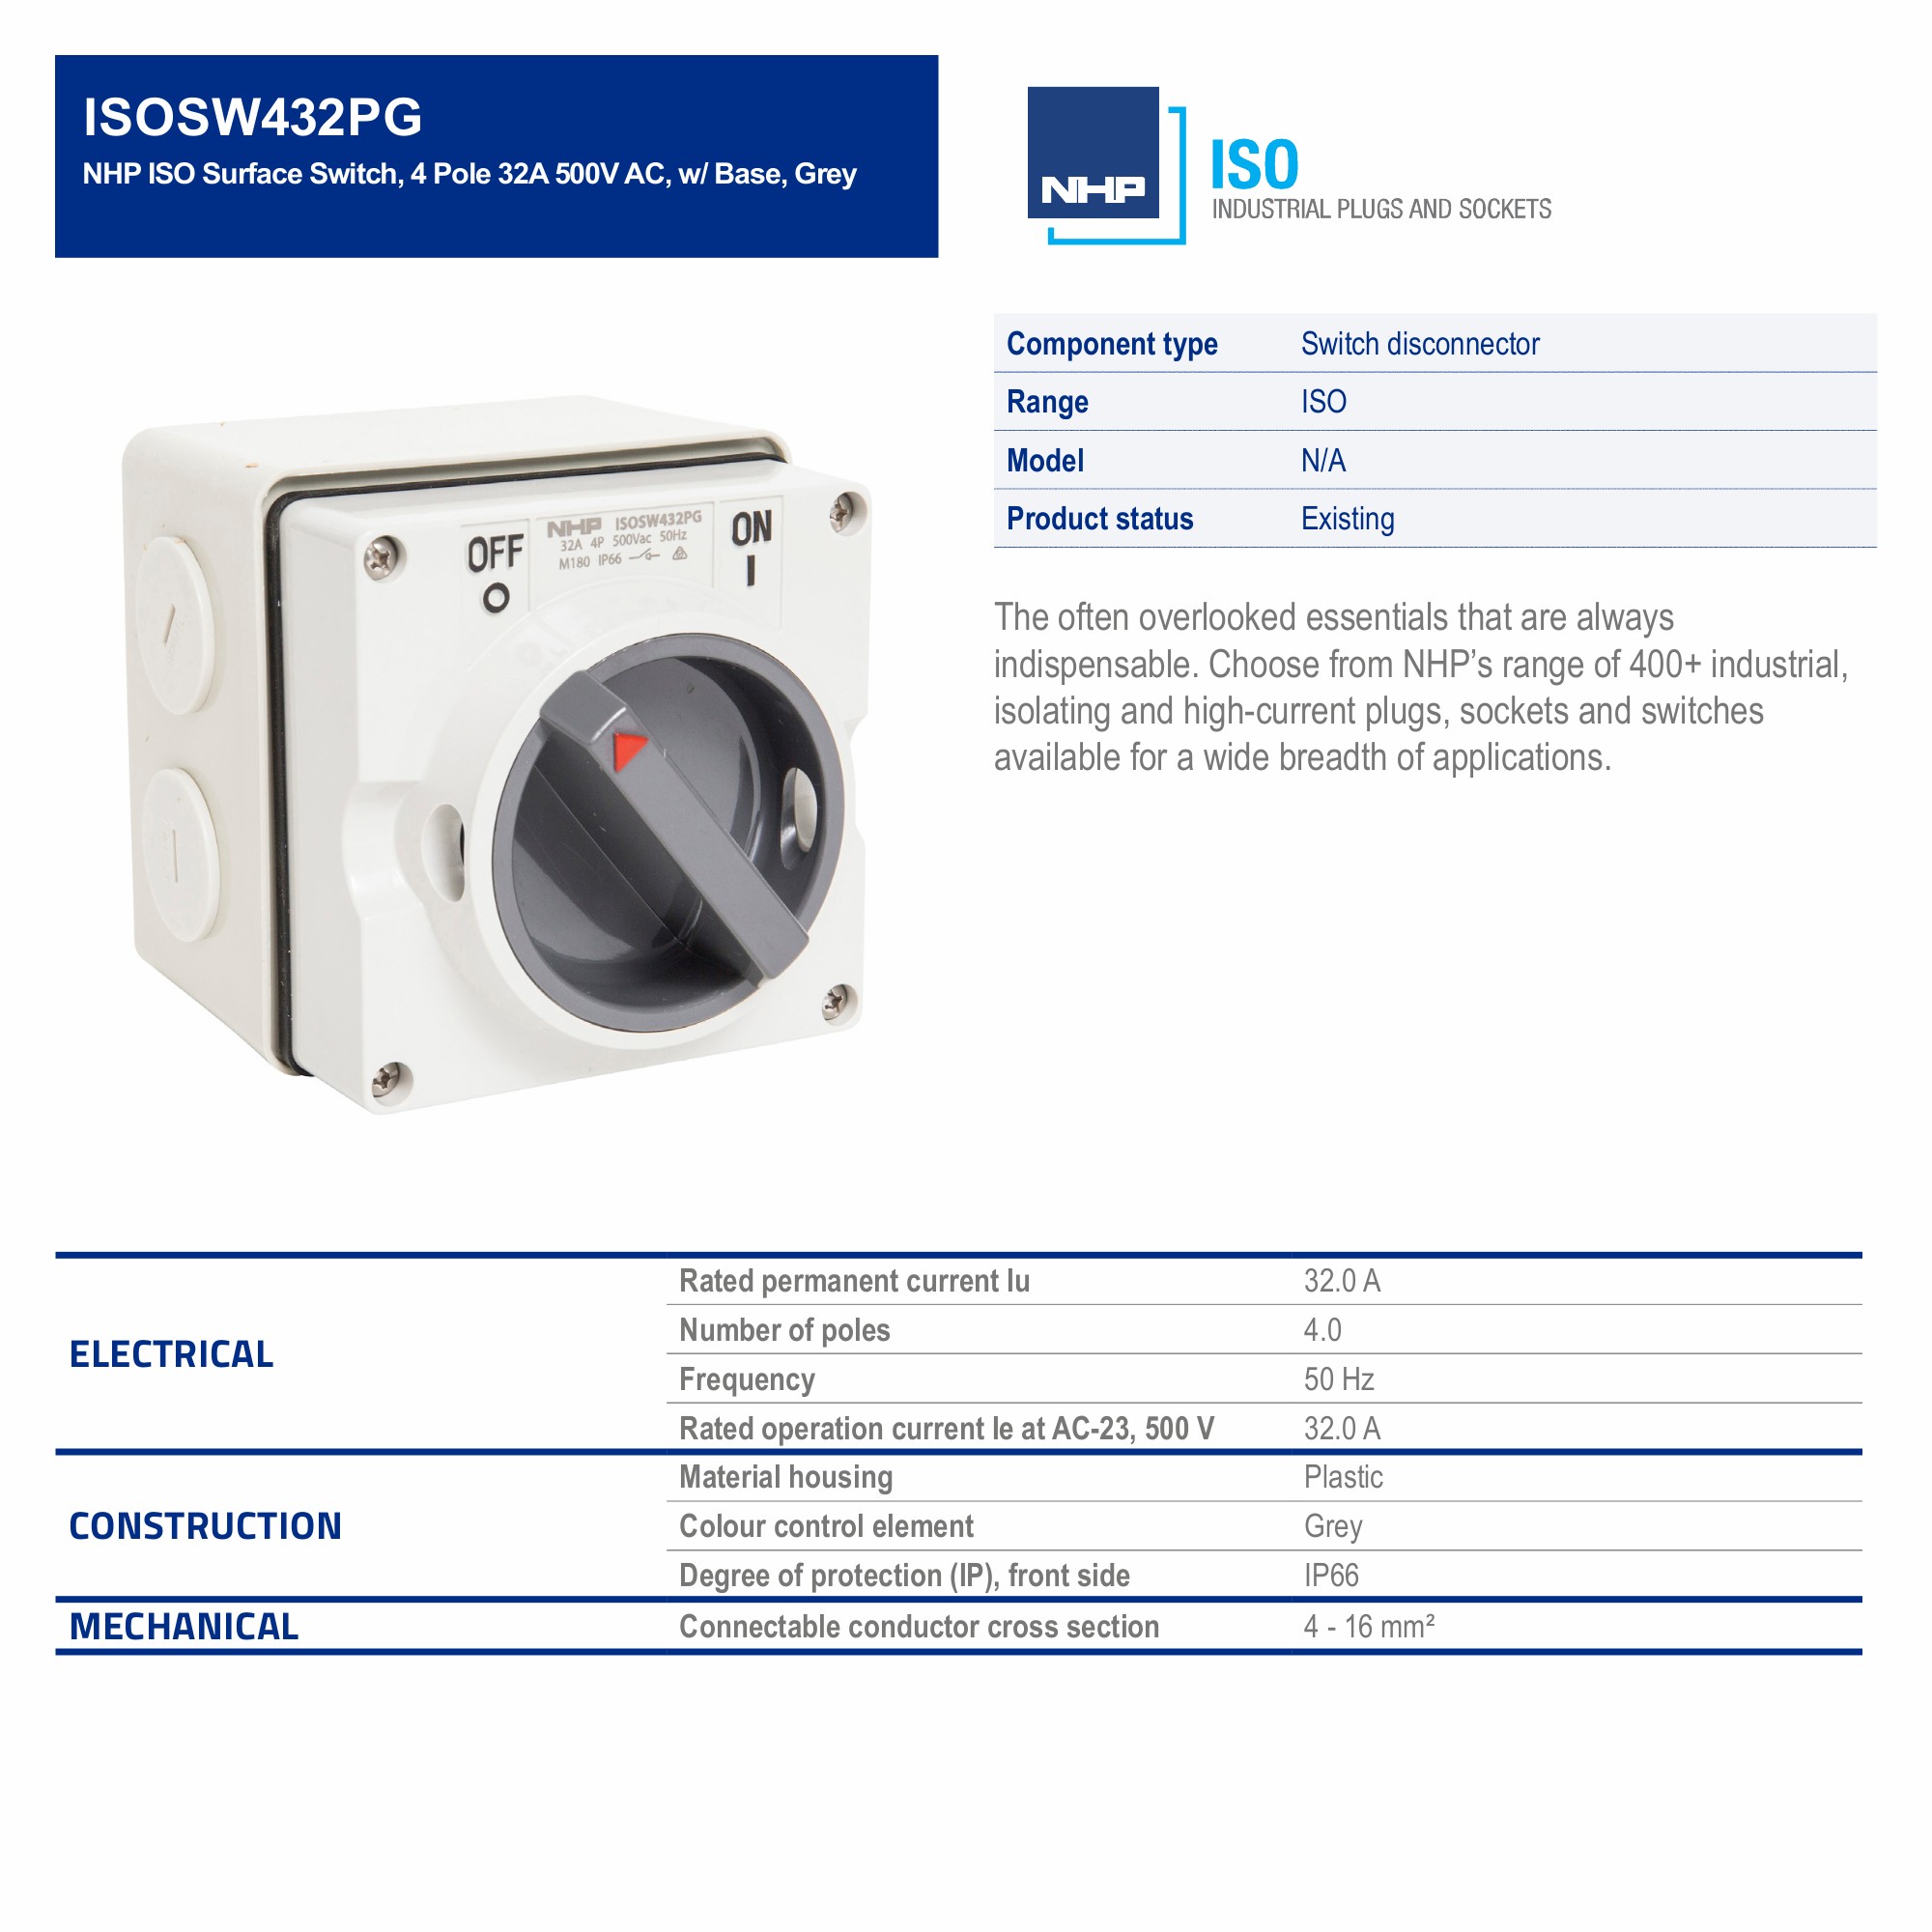 NHP NLINE Enclosed DC Isolating Switch, IP66NW Plastic, 4 Pole 32A 1500V DC  (DC-PV2)